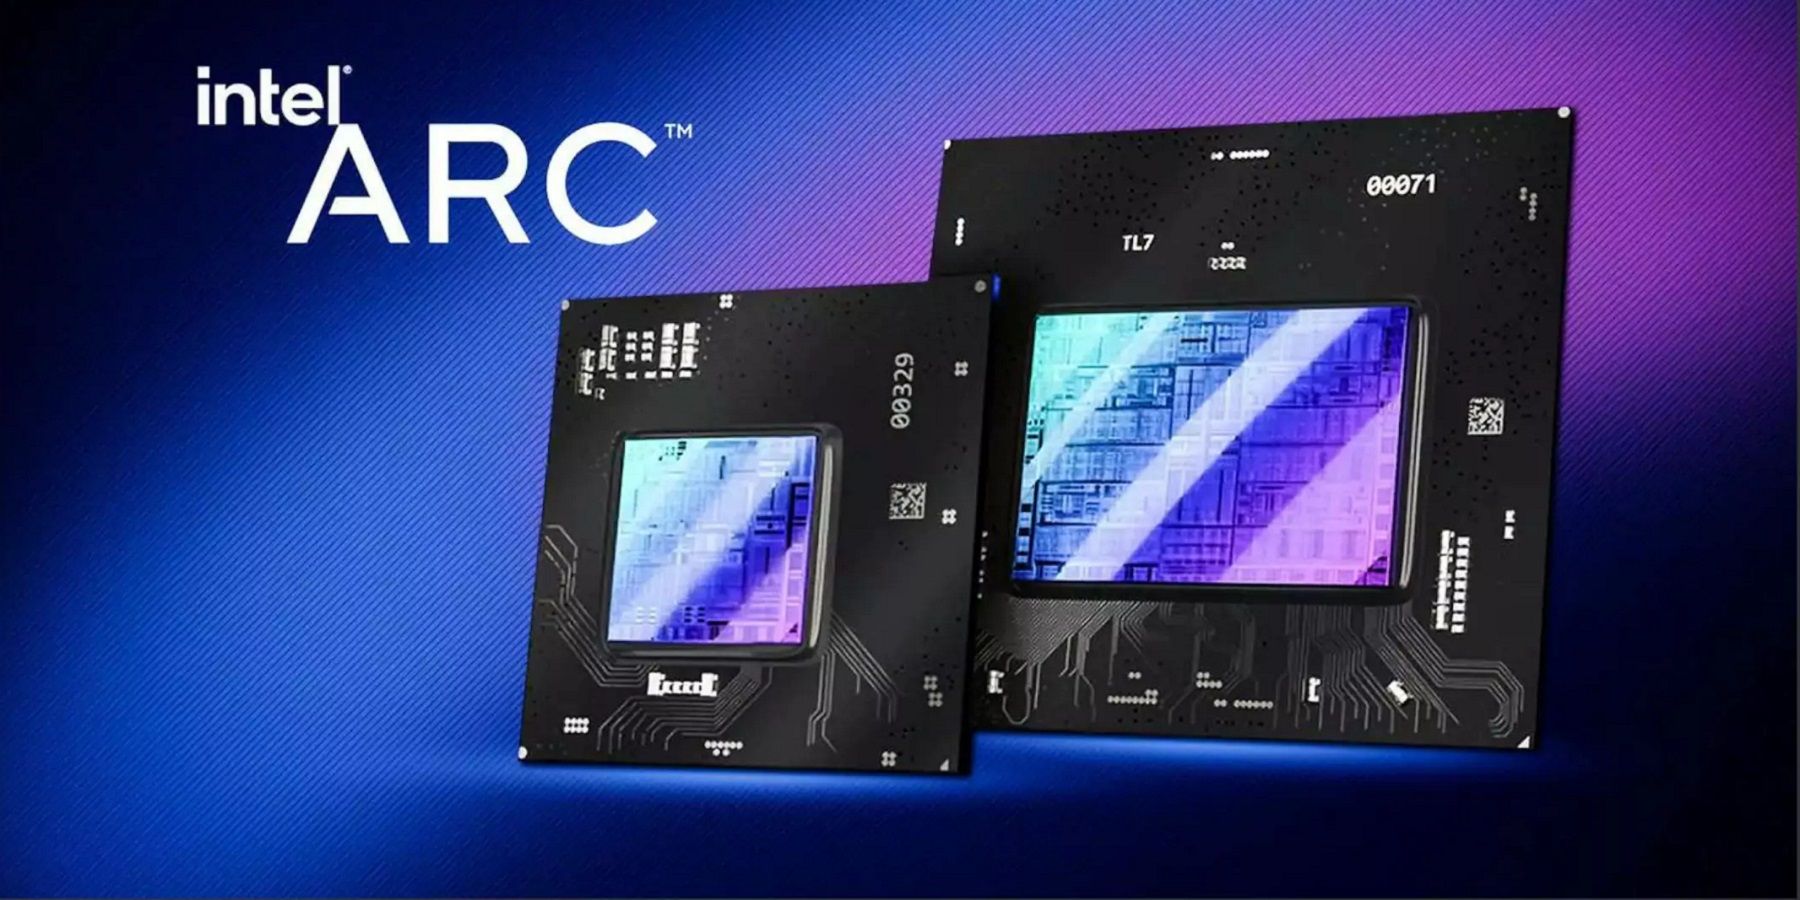 Image showing two Intel Arc graphics chips next to each other on a blue and purple background.